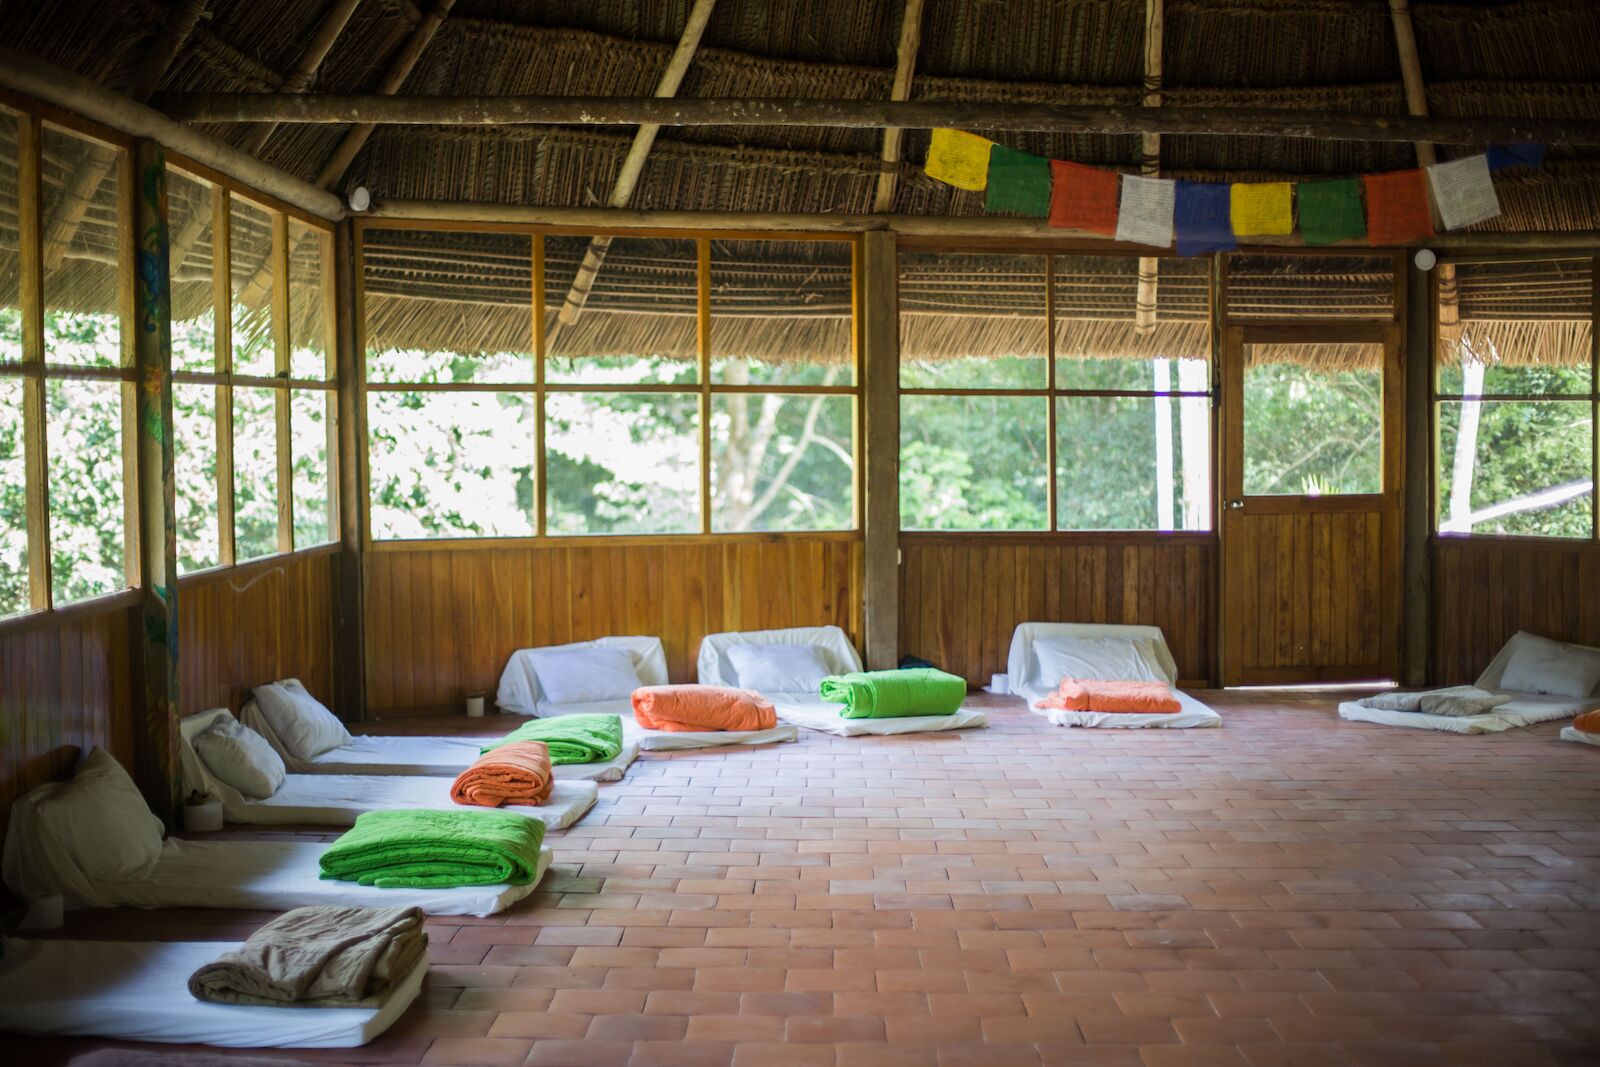 The room of the Ayahuasca ceremony and yoga practice